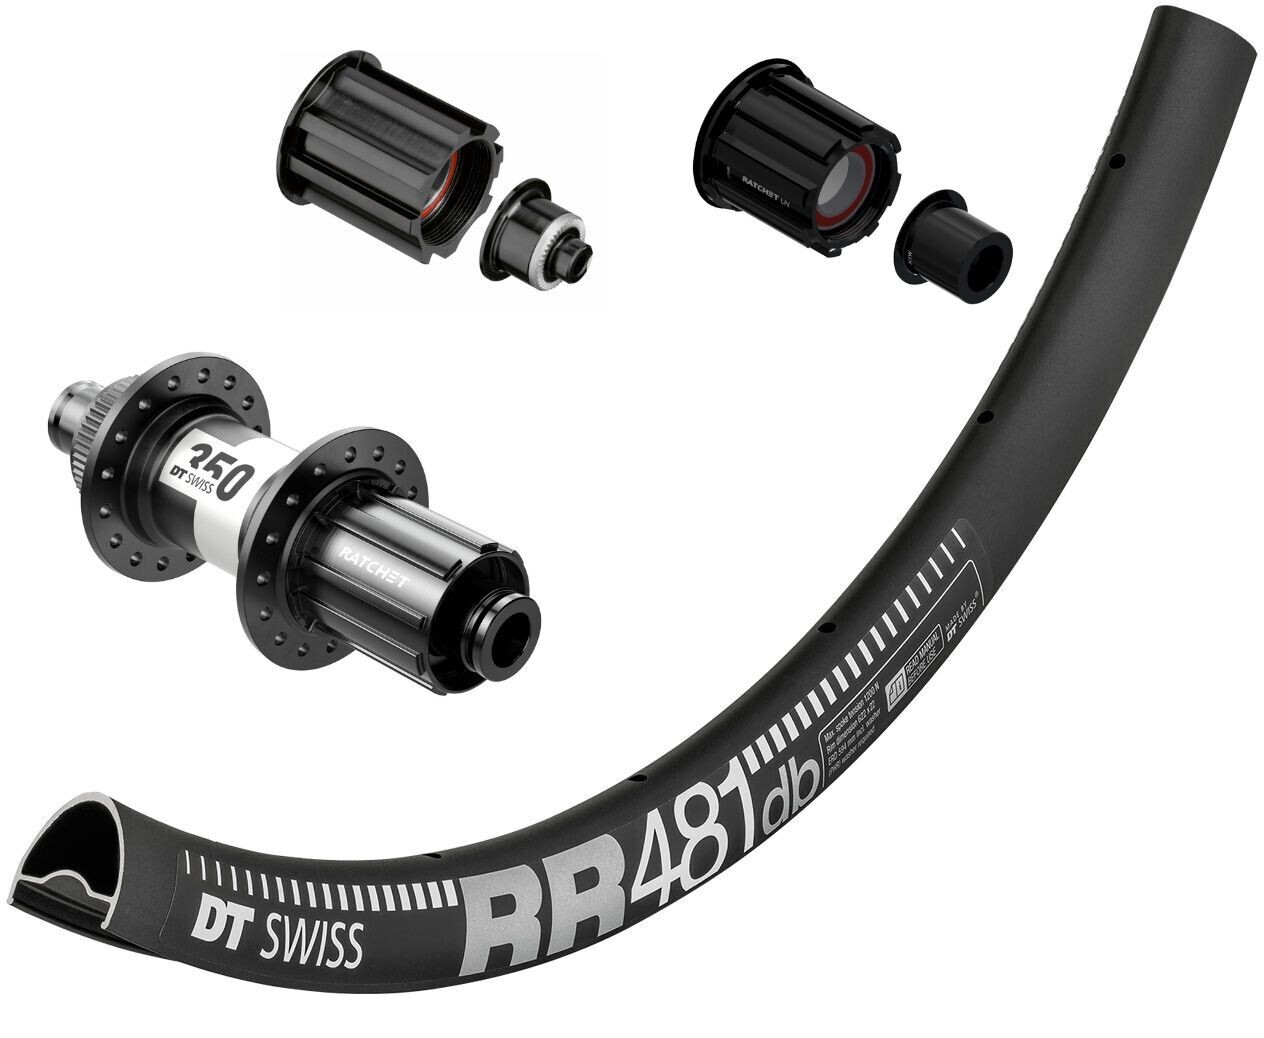 DT Swiss RR 481 700c rim with DT Swiss 350 hubs. For disc brake, quick release or 12mm thru-axles. CAMPAGNOLO